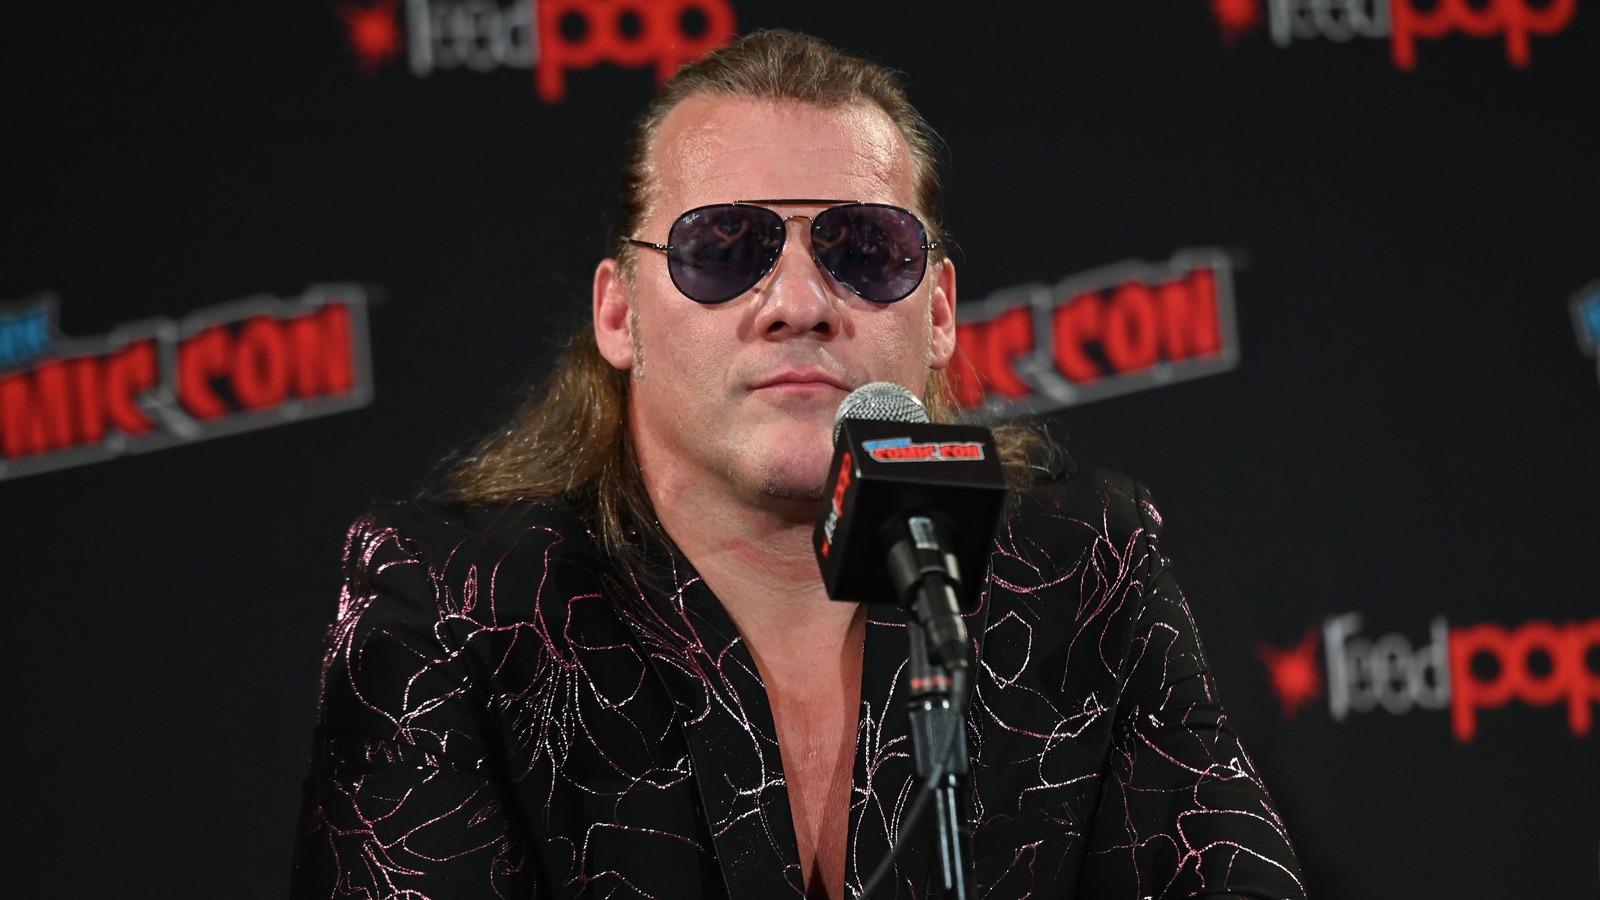 Important Chris Jericho stipulation match booked for AEW Dynamite next week